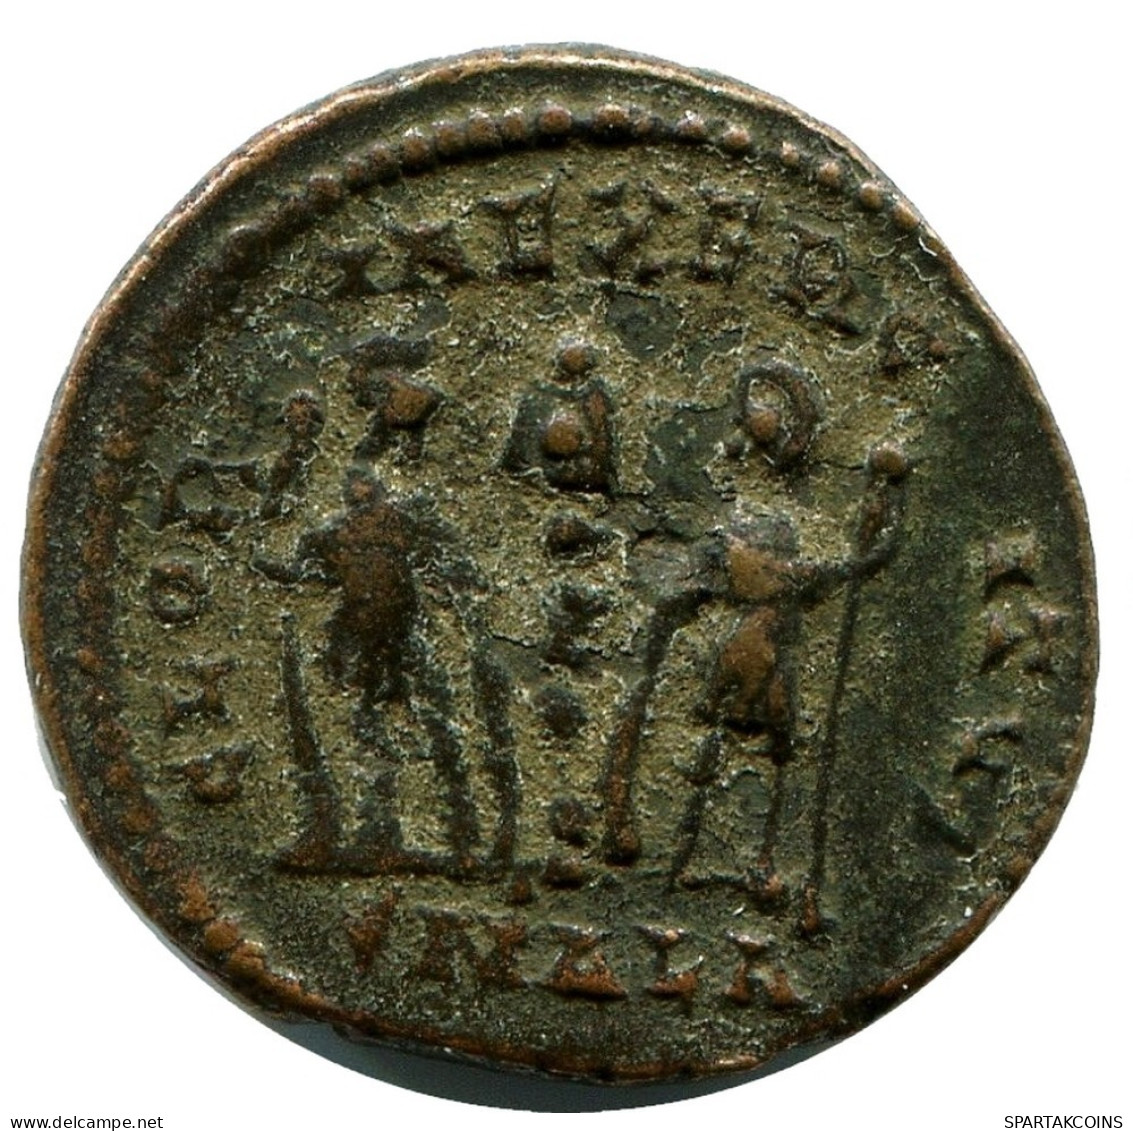 CONSTANS MINTED IN ALEKSANDRIA FOUND IN IHNASYAH HOARD EGYPT #ANC11353.14.F.A - The Christian Empire (307 AD To 363 AD)